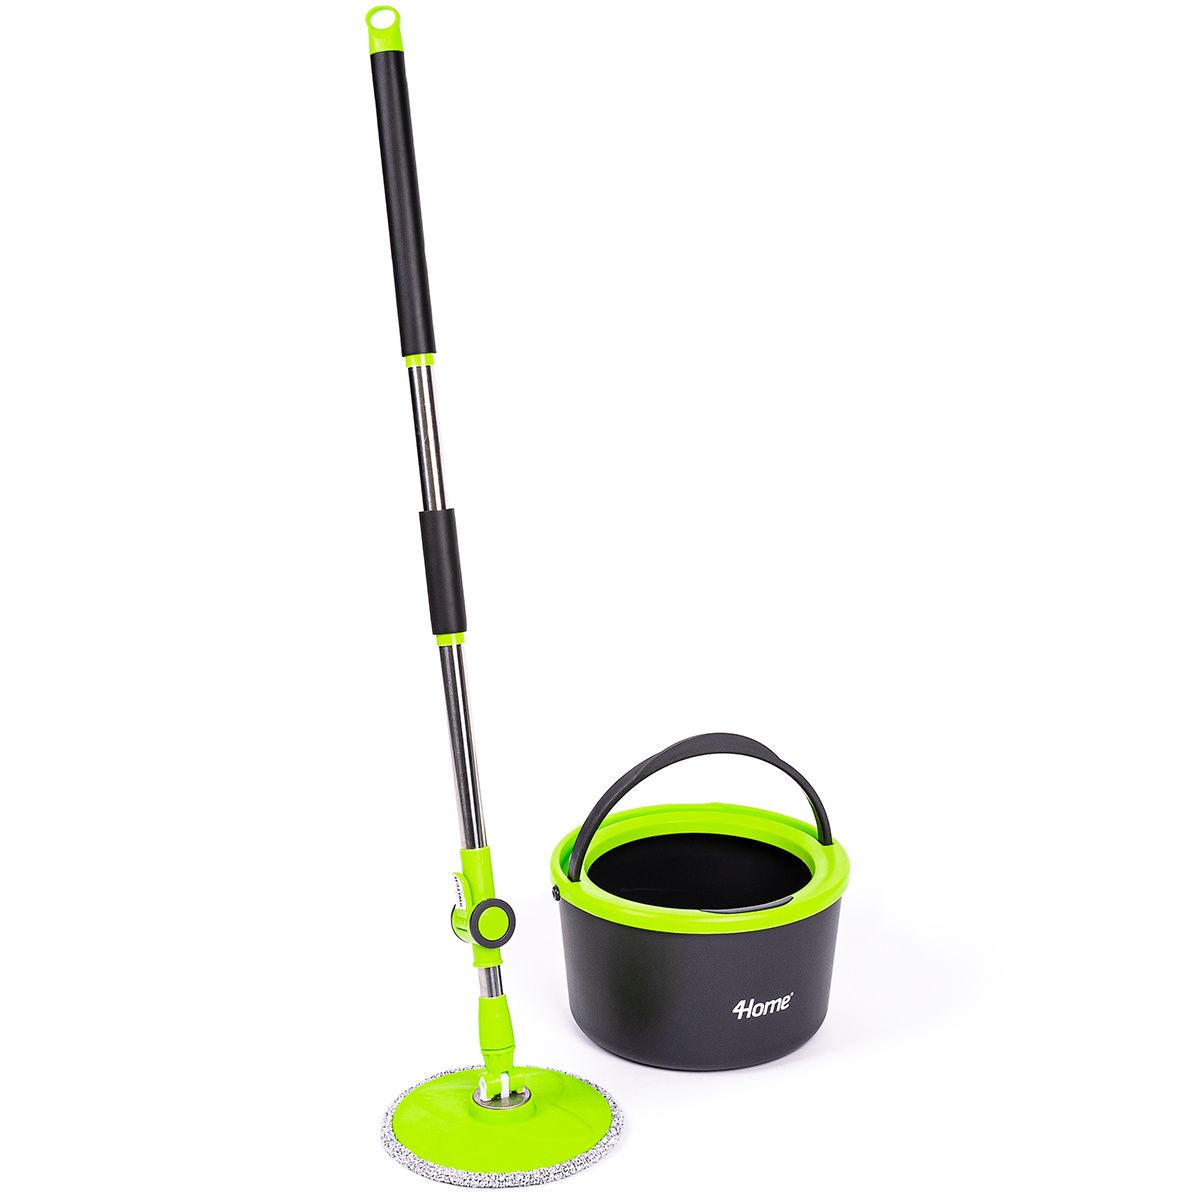 4Home Rapid Clean Compact Spin mop - 4home.cz